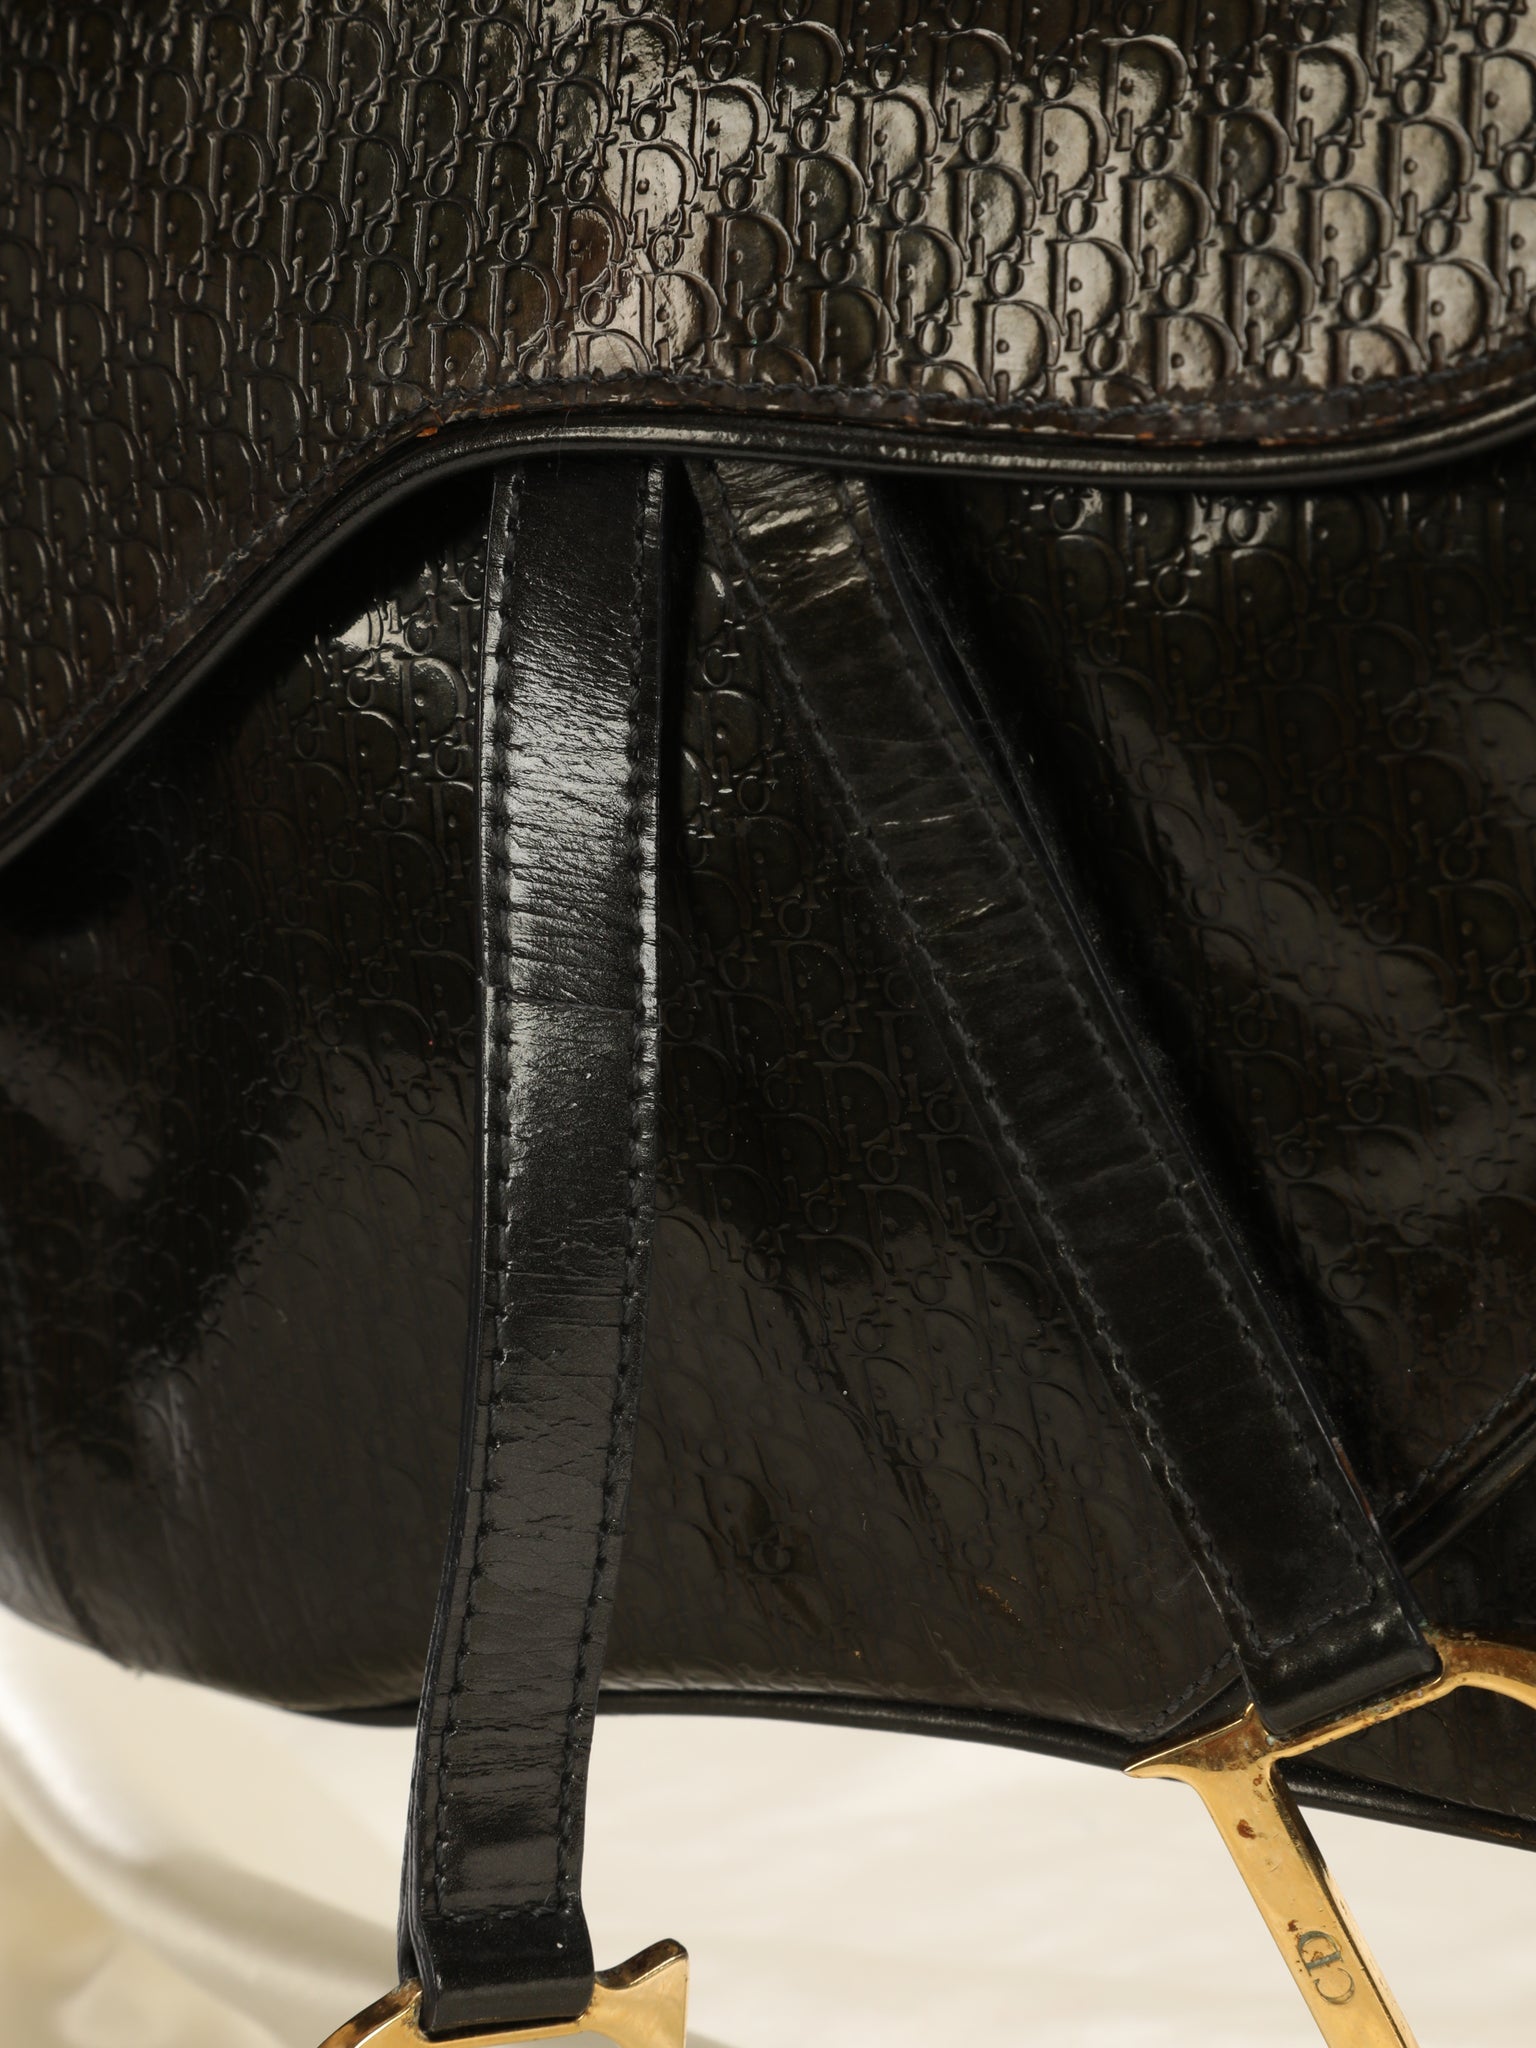 Extremely Rare Dior Patent Double Saddle Bag